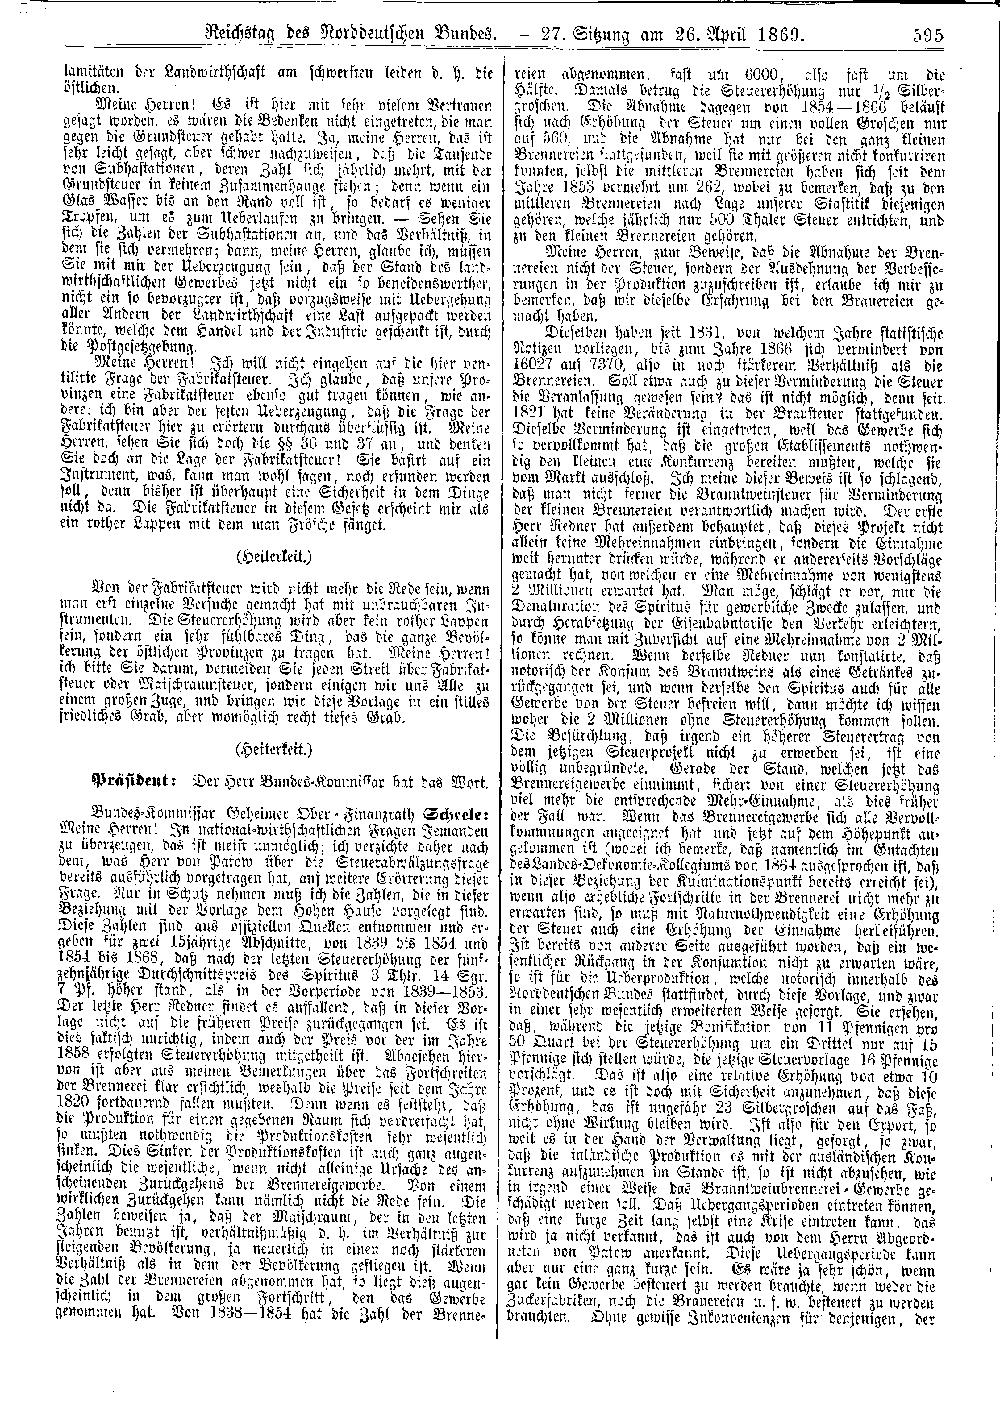 Scan of page 595